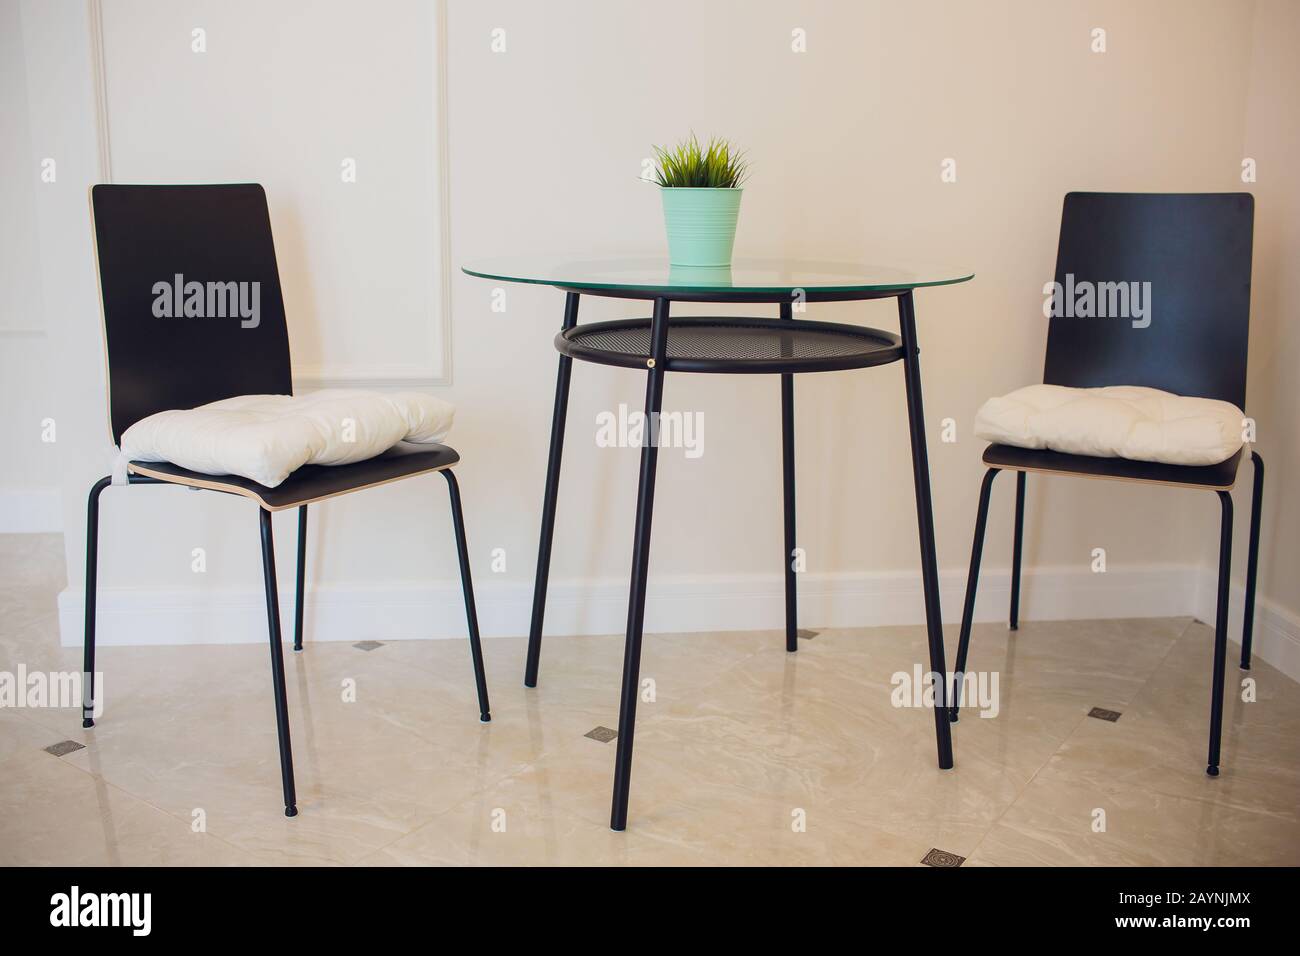 Glass Table And White Modern Chairs In Dining Room Interior Stock Photo Alamy